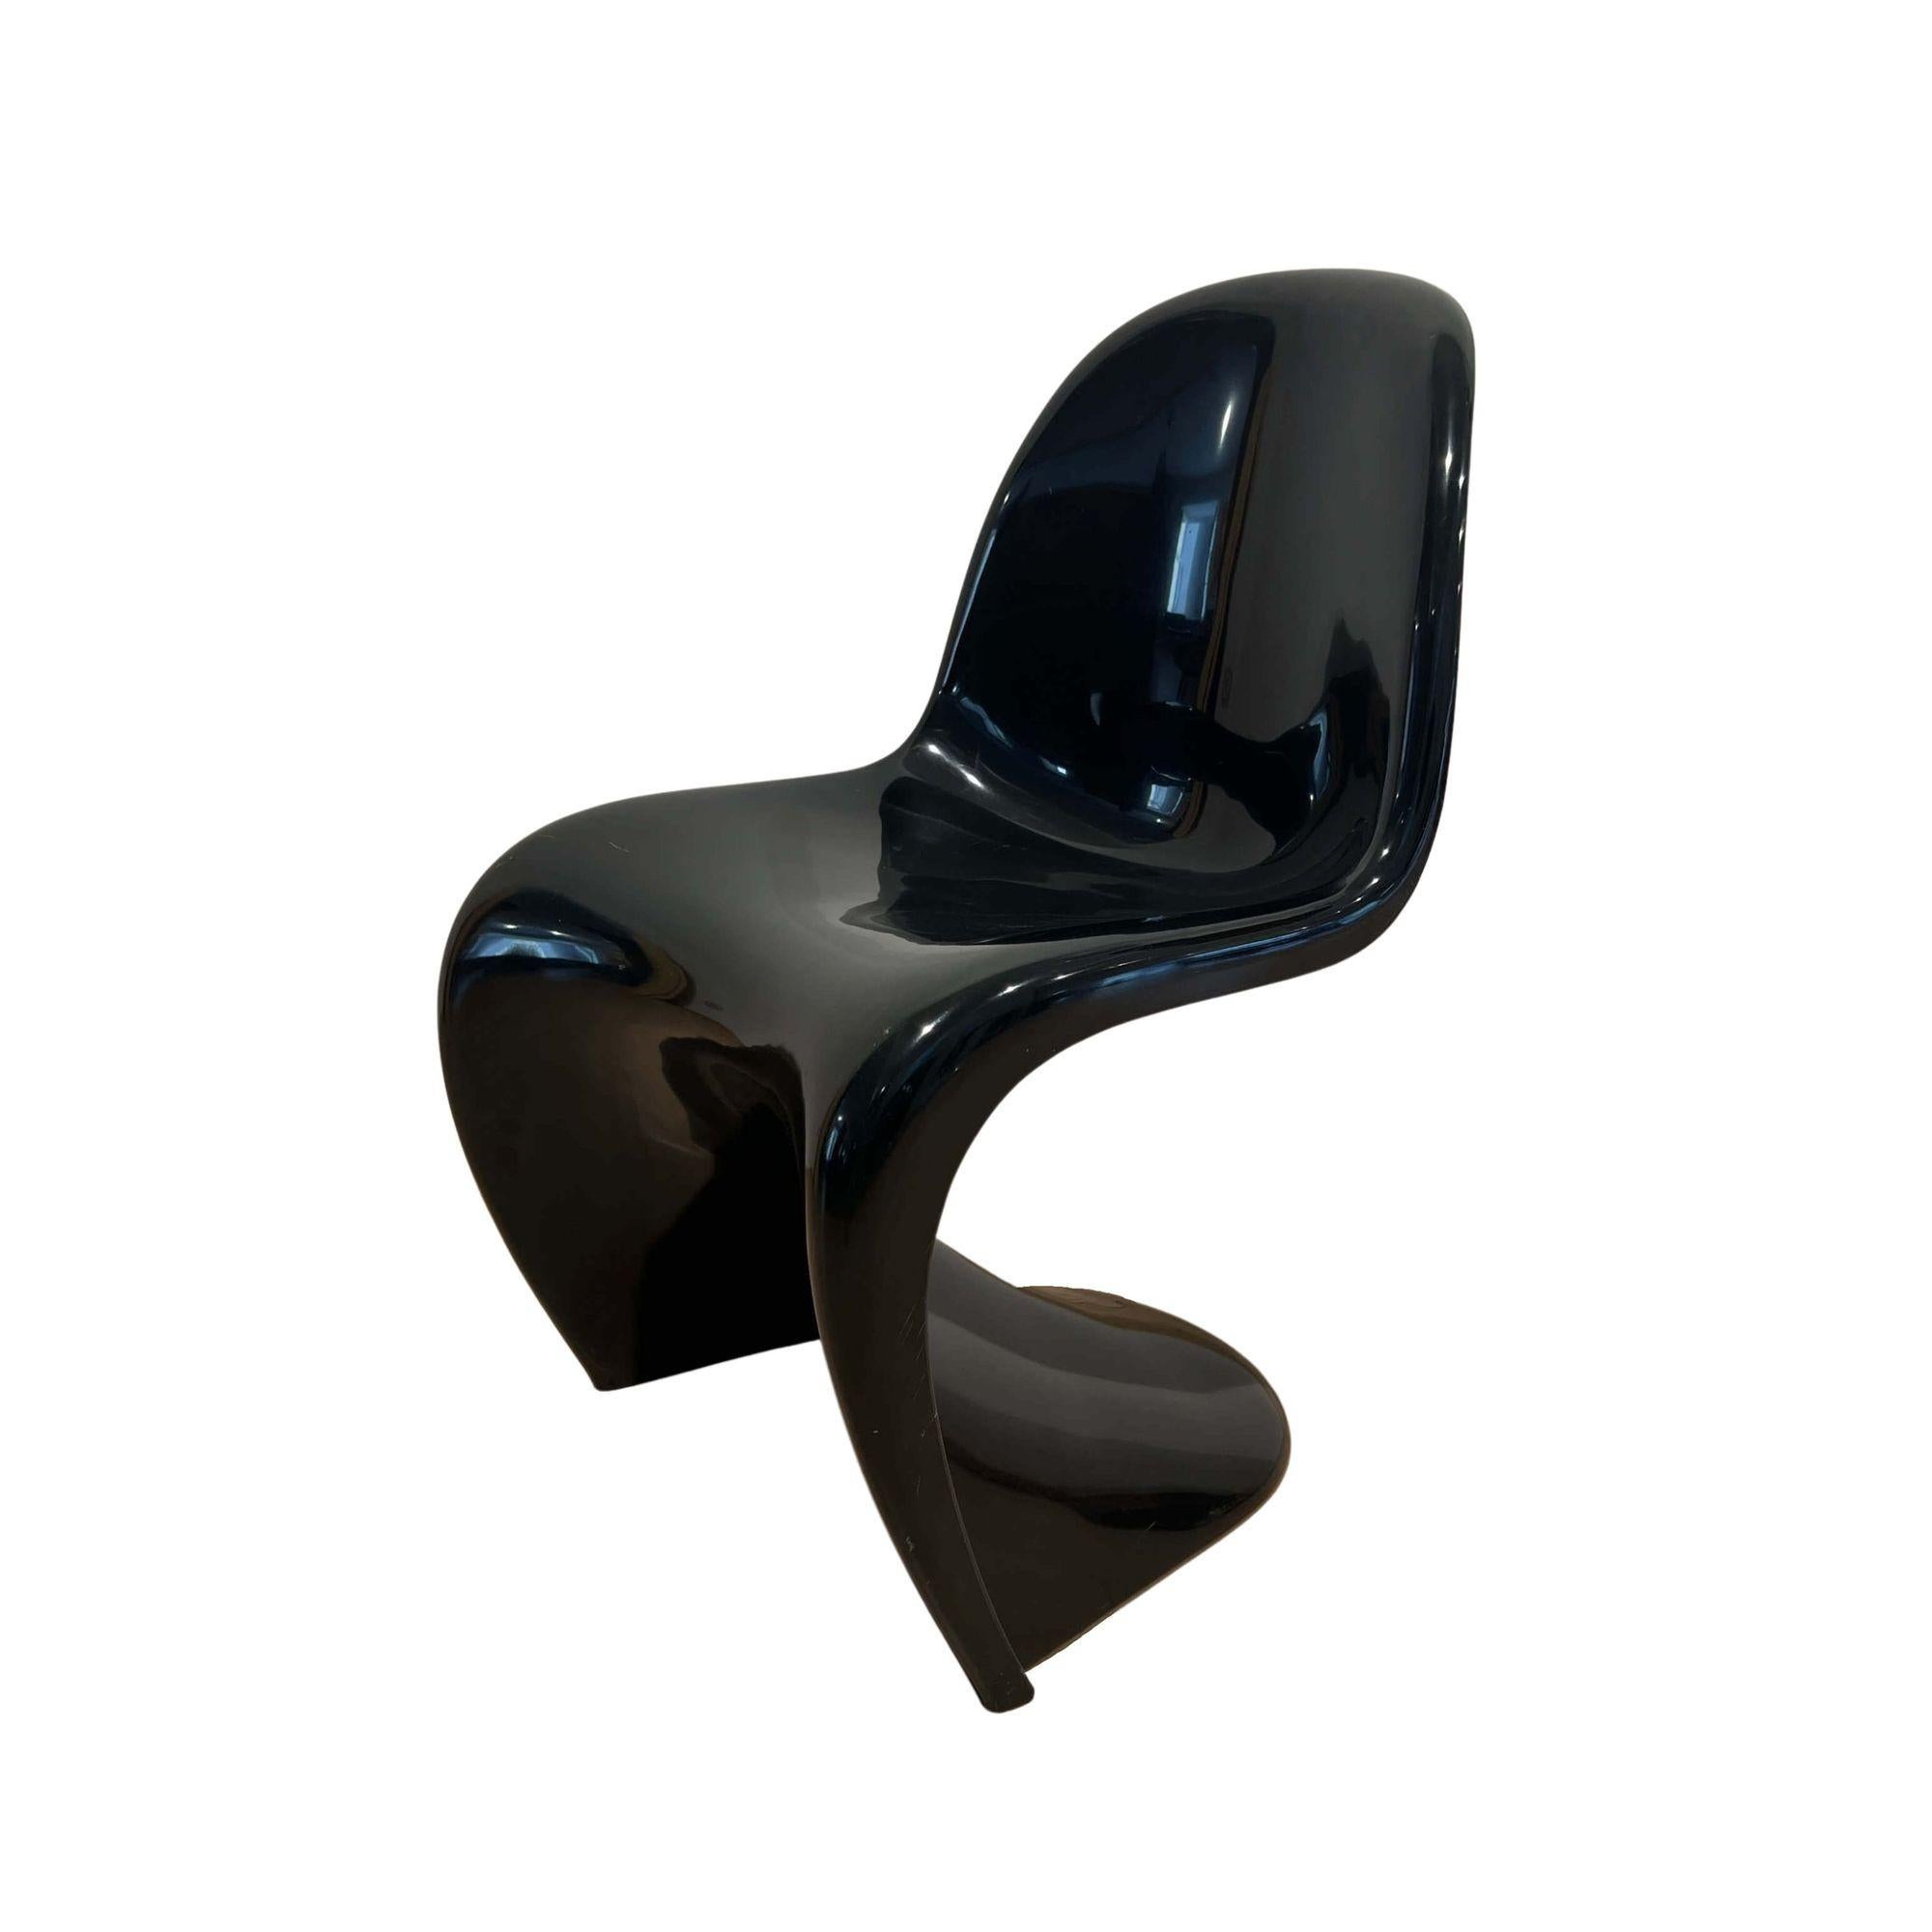 Early Space Age Cantilever Chair 'Panton' by Verner Panton in Black, Germany 1970s
 
Design: Verner Panton, 1958-60
Execution Fehlbaum Productions under license from Hermann Miller
stamped 